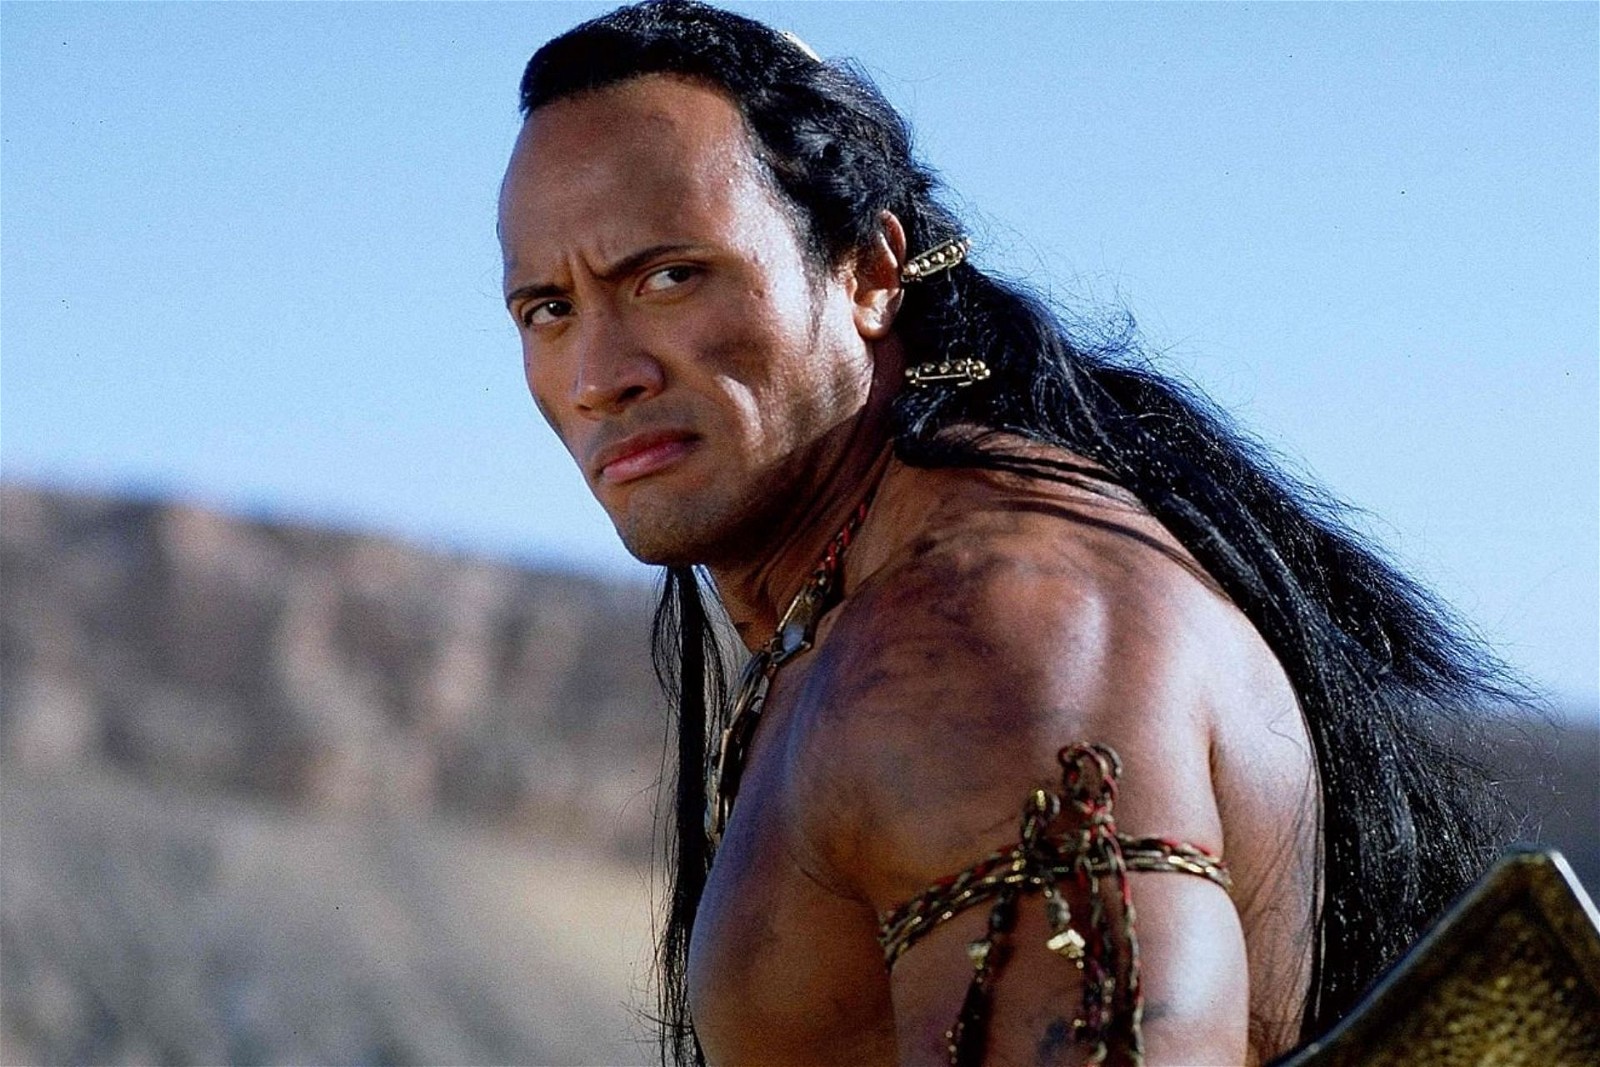 Dwayne Johnson's first Egypt-related role as The Scorpion King